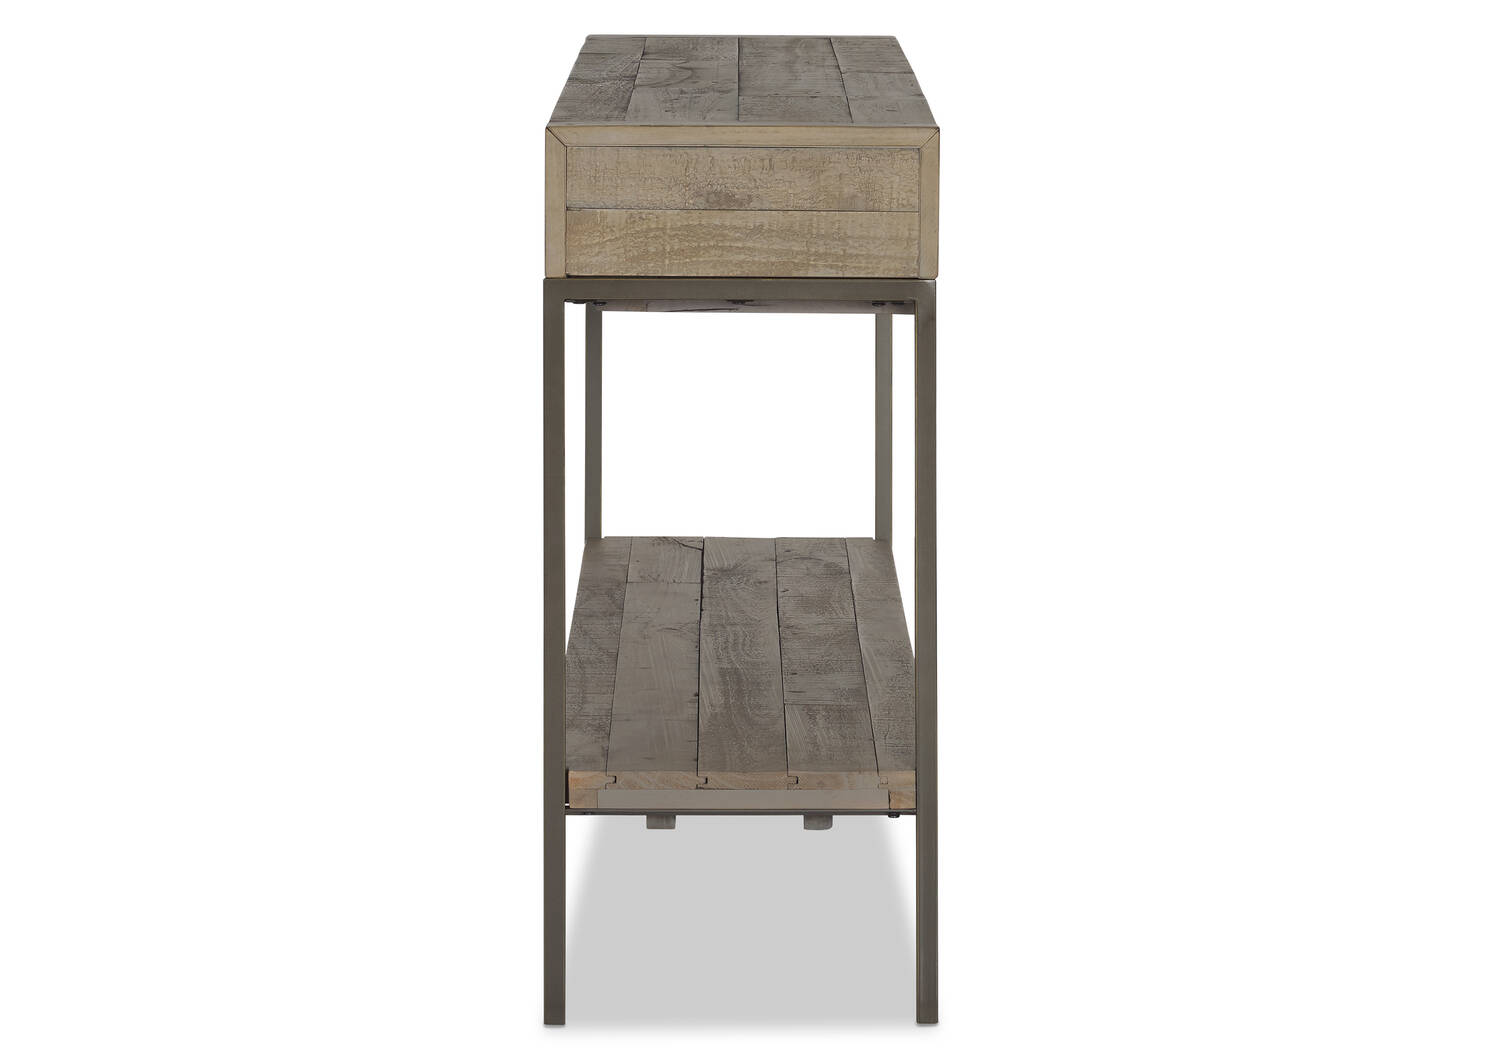 Bronson Console Table -Guthrie Driftwood